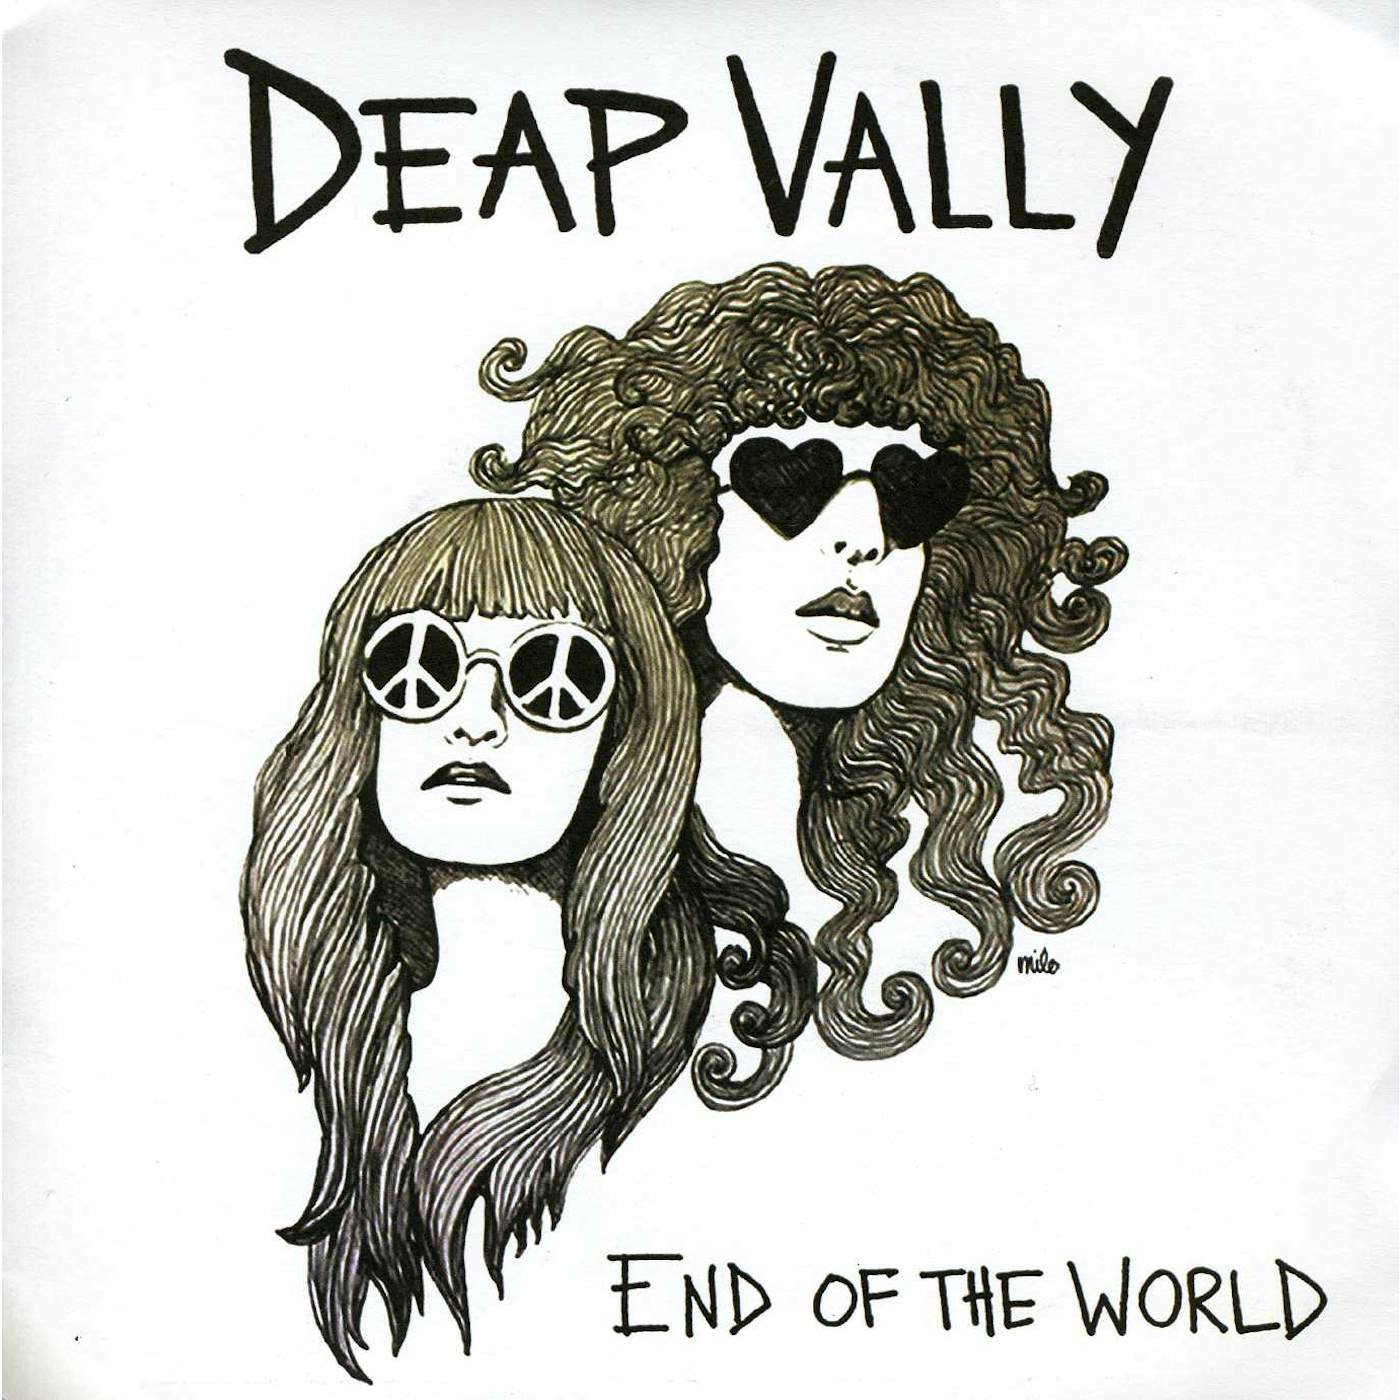 Deap Vally END OF THE WORLD Vinyl Record